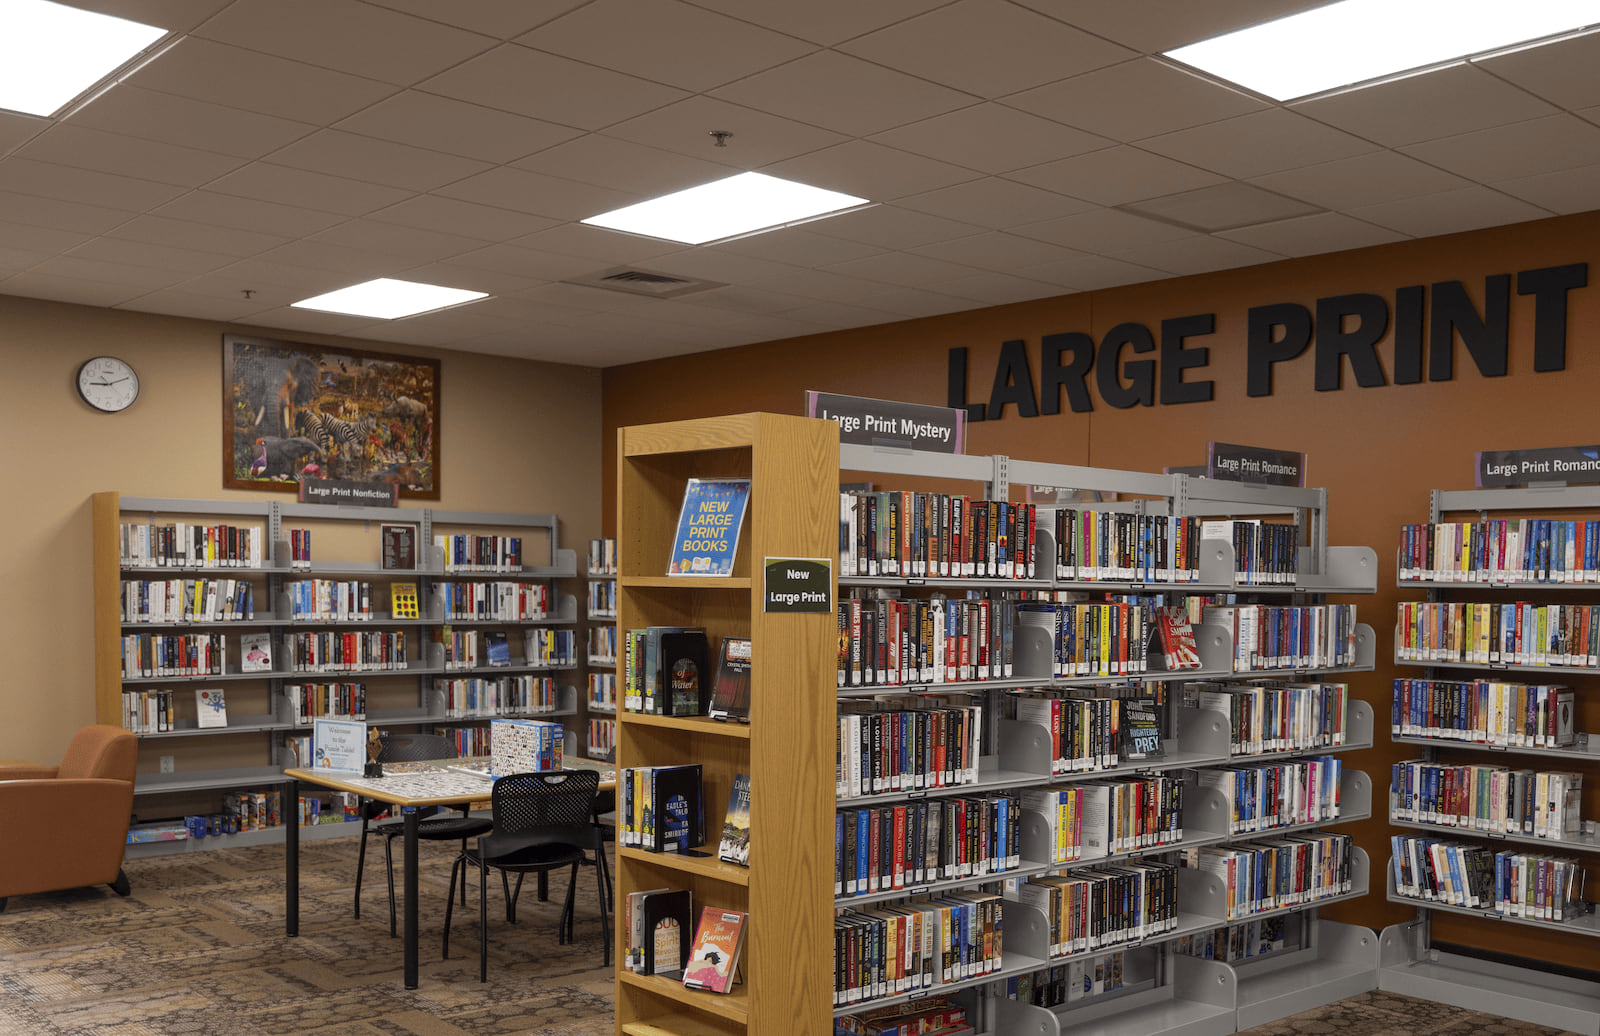 Photo of the large print shelves and puzzle table